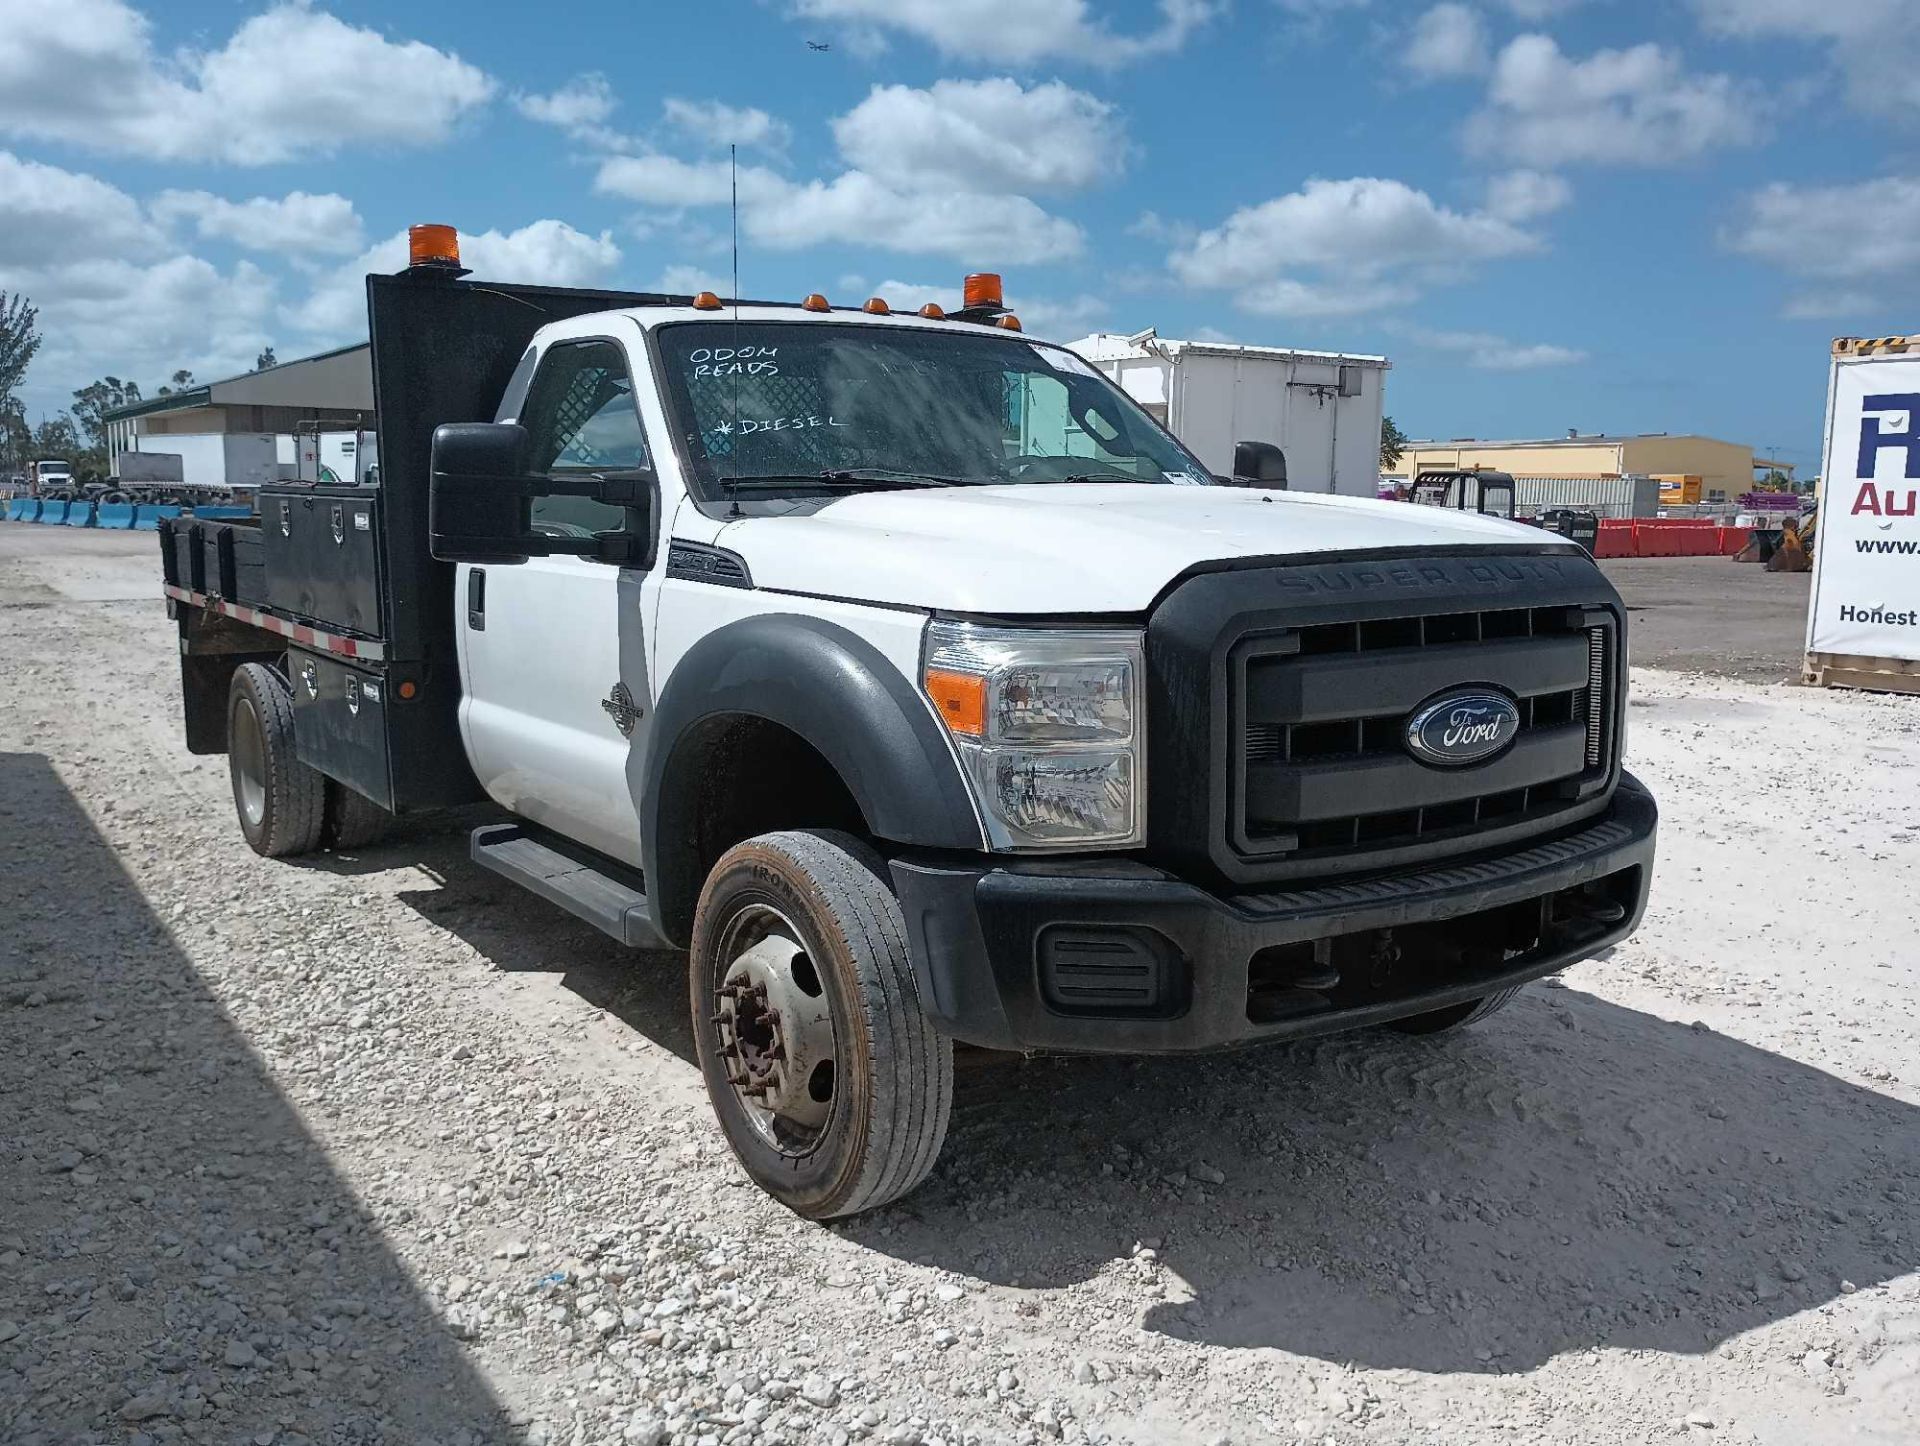 2016 Ford F-450 Flat Bed Truck - Image 2 of 28